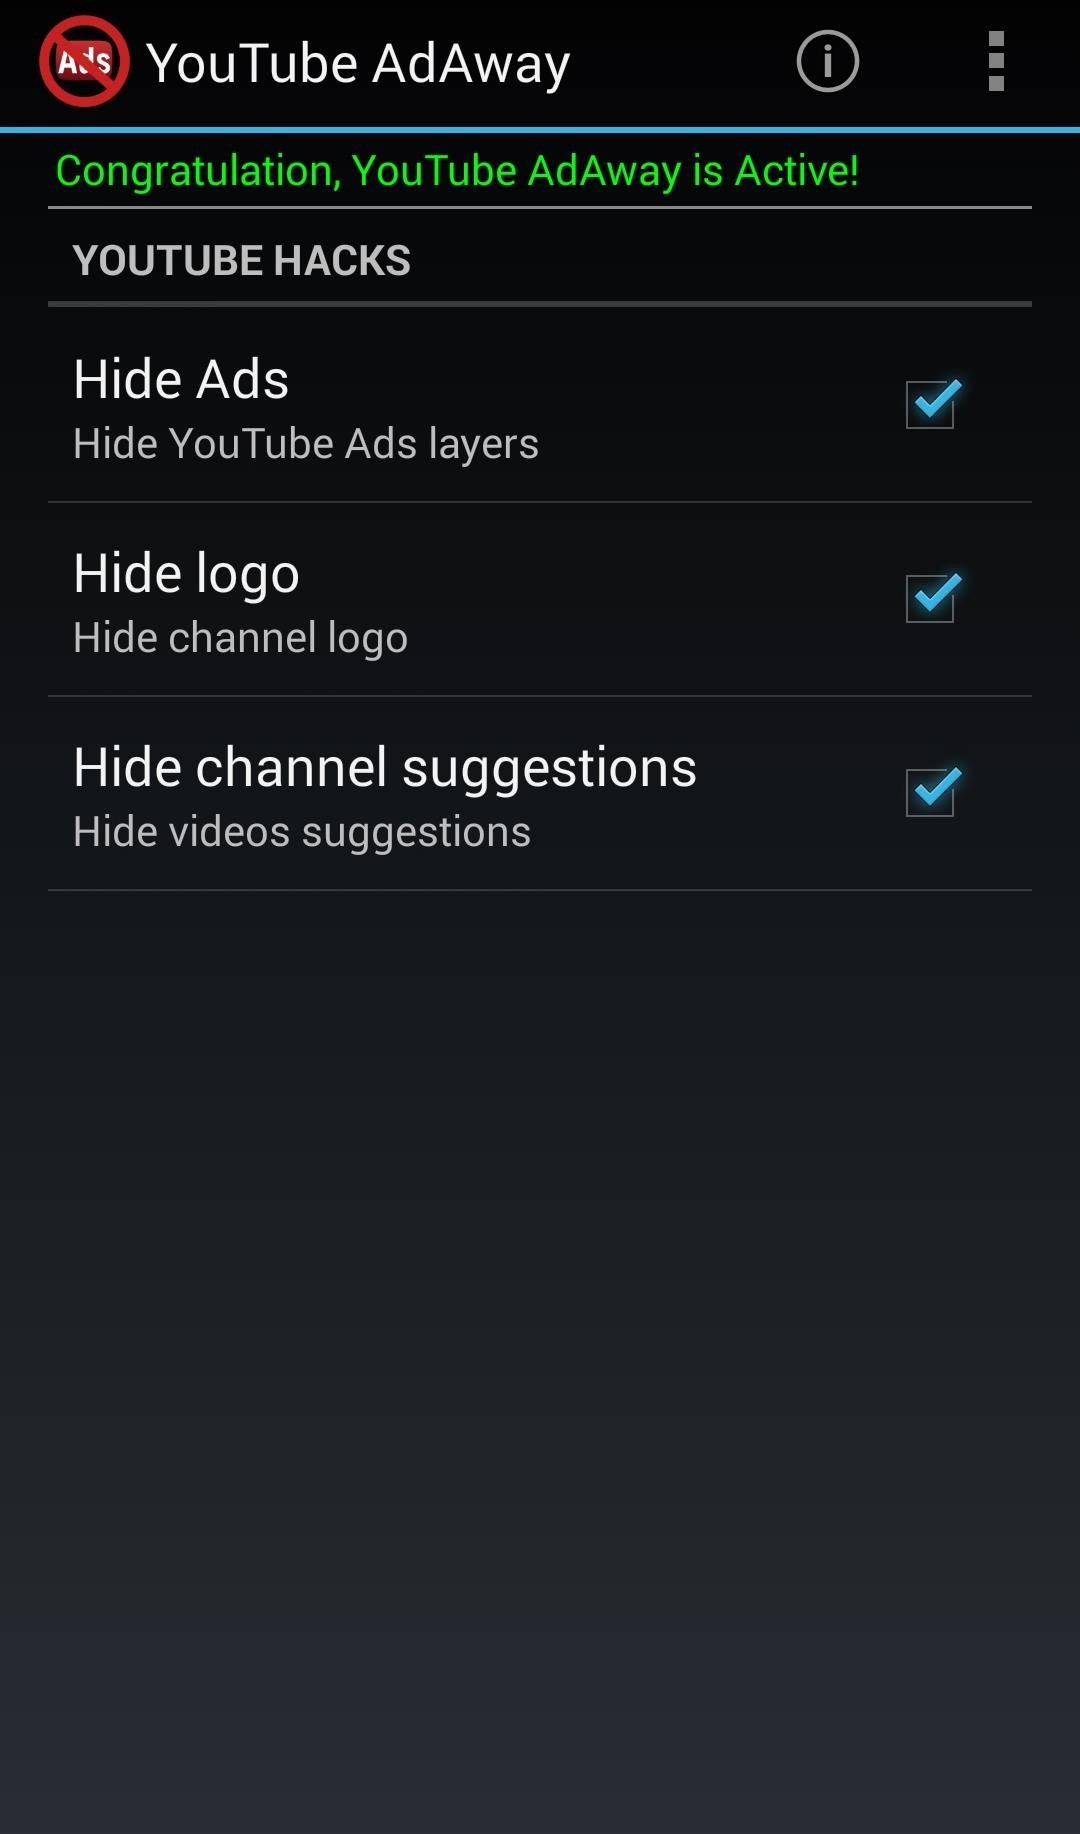 How to Get Rid of Annoying YouTube Ads on Your HTC One